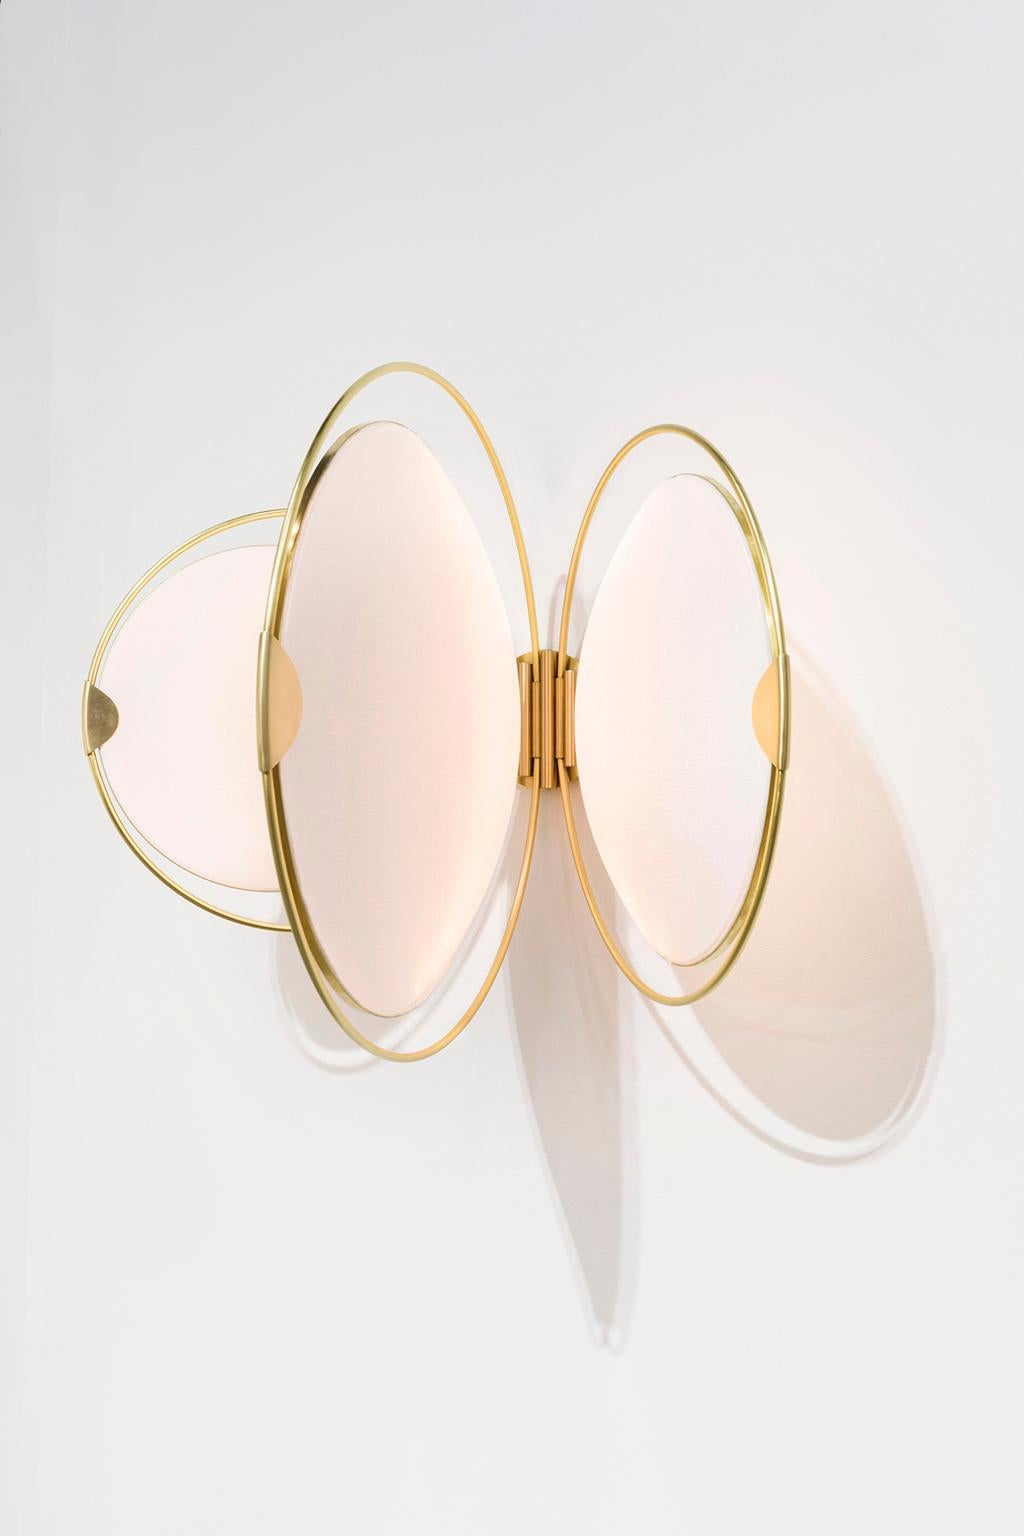 The Hoop Shade was inspired by the construction and dynamic motion of hoop skirts from the early 1900s. The large brass hoops rotate back and forth, and the shades rotate within those hoops, allowing the user to adjust the light to their needs.